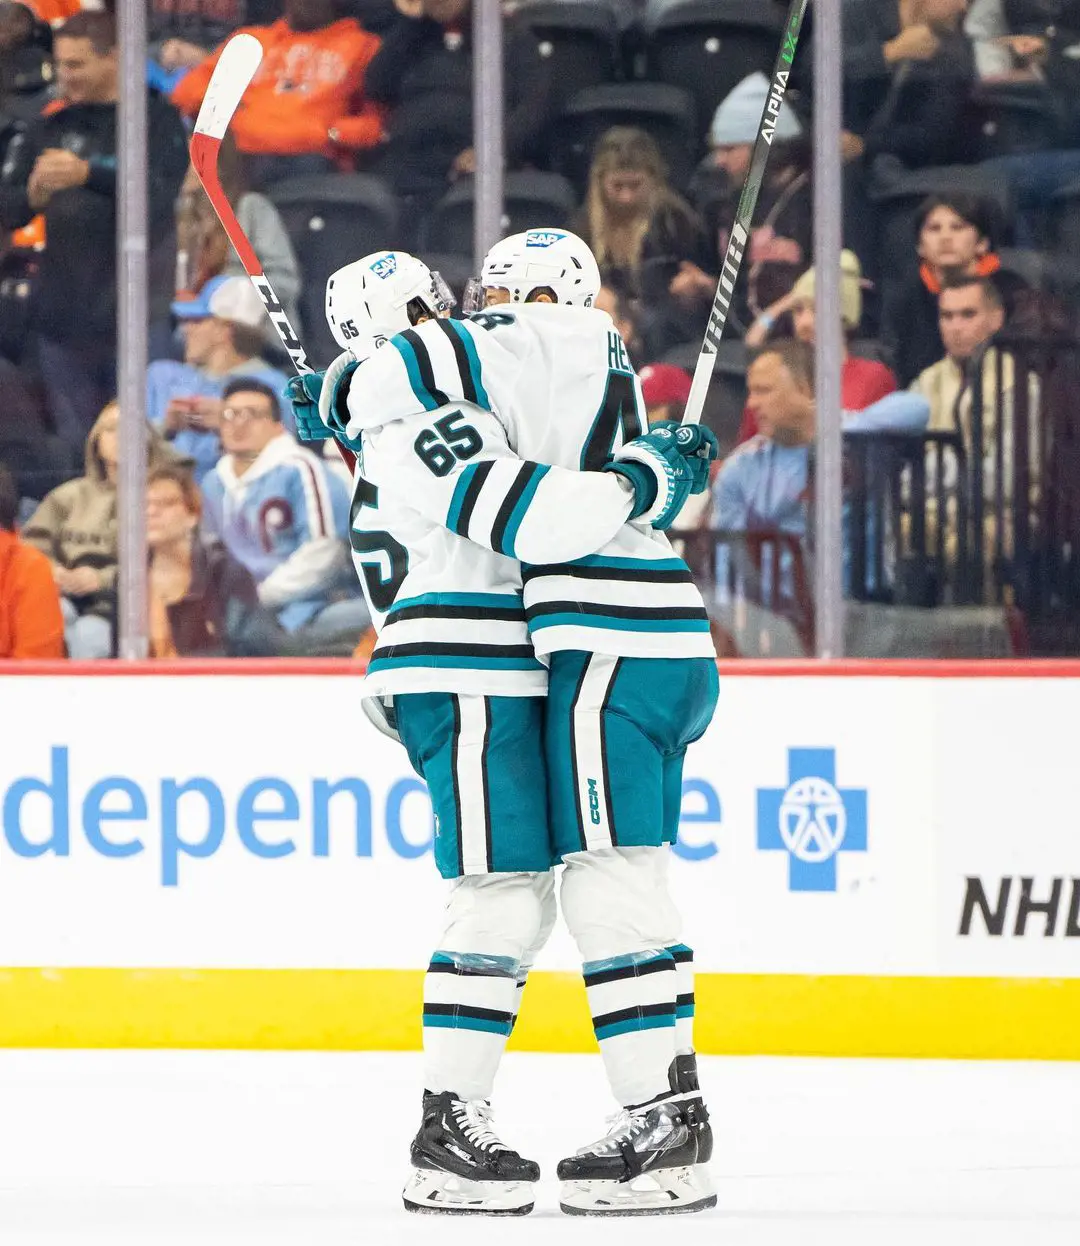 Evgeny Svechnikov and Tomas Hertl hugging each other a win over Philadelphia Flyers in October 24, 2012